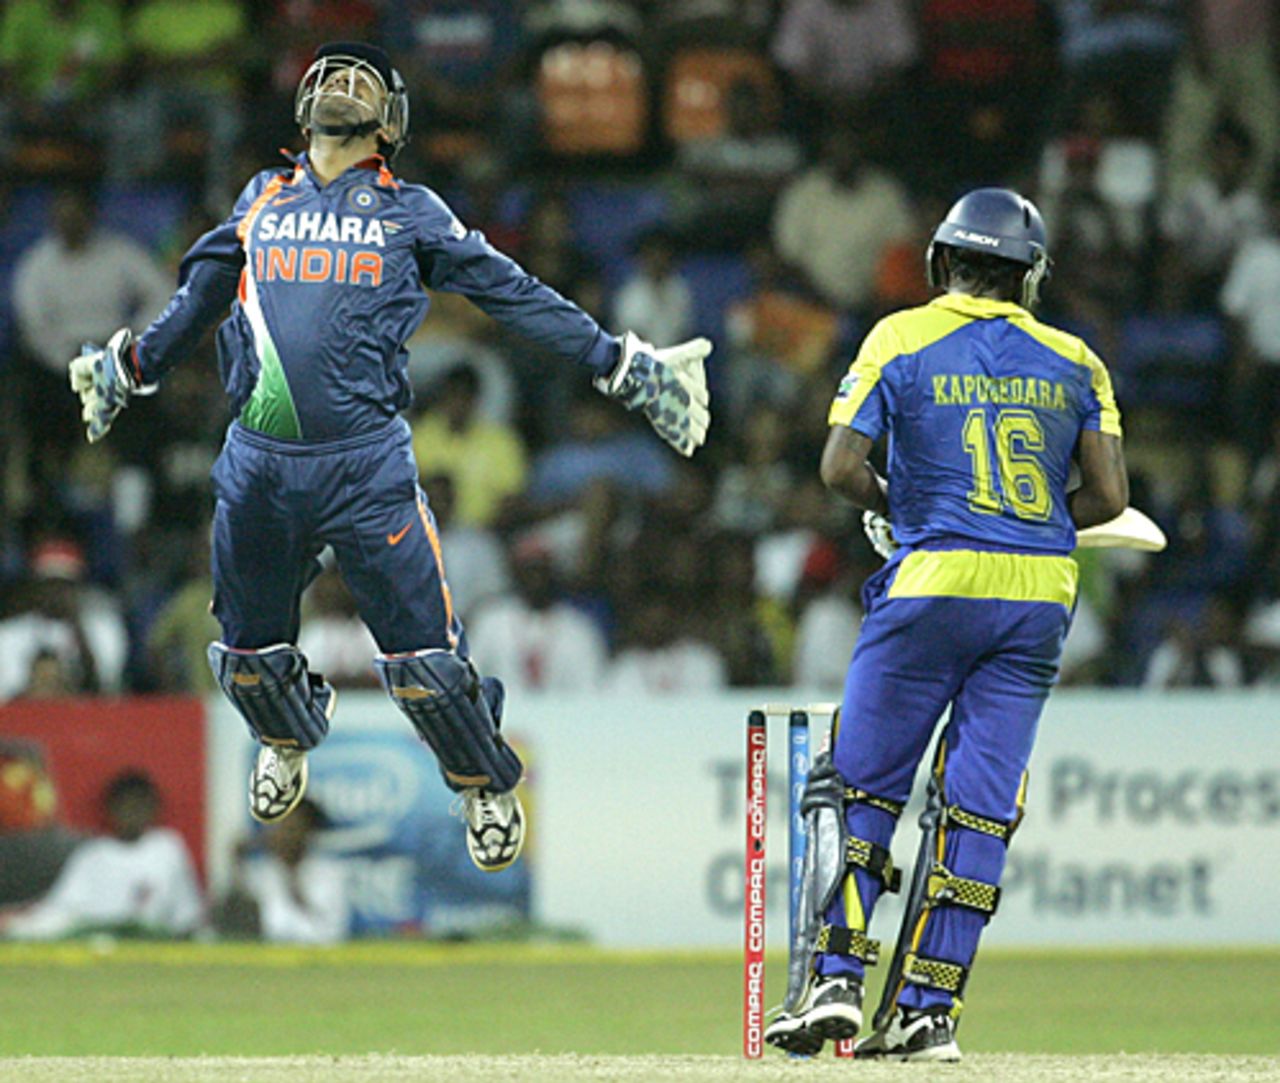 MS Dhoni celebrates after latching on to an edge from Chamara Kapugedera, Sri Lanka v India, Compaq Cup, final, Colombo, September 14, 2009